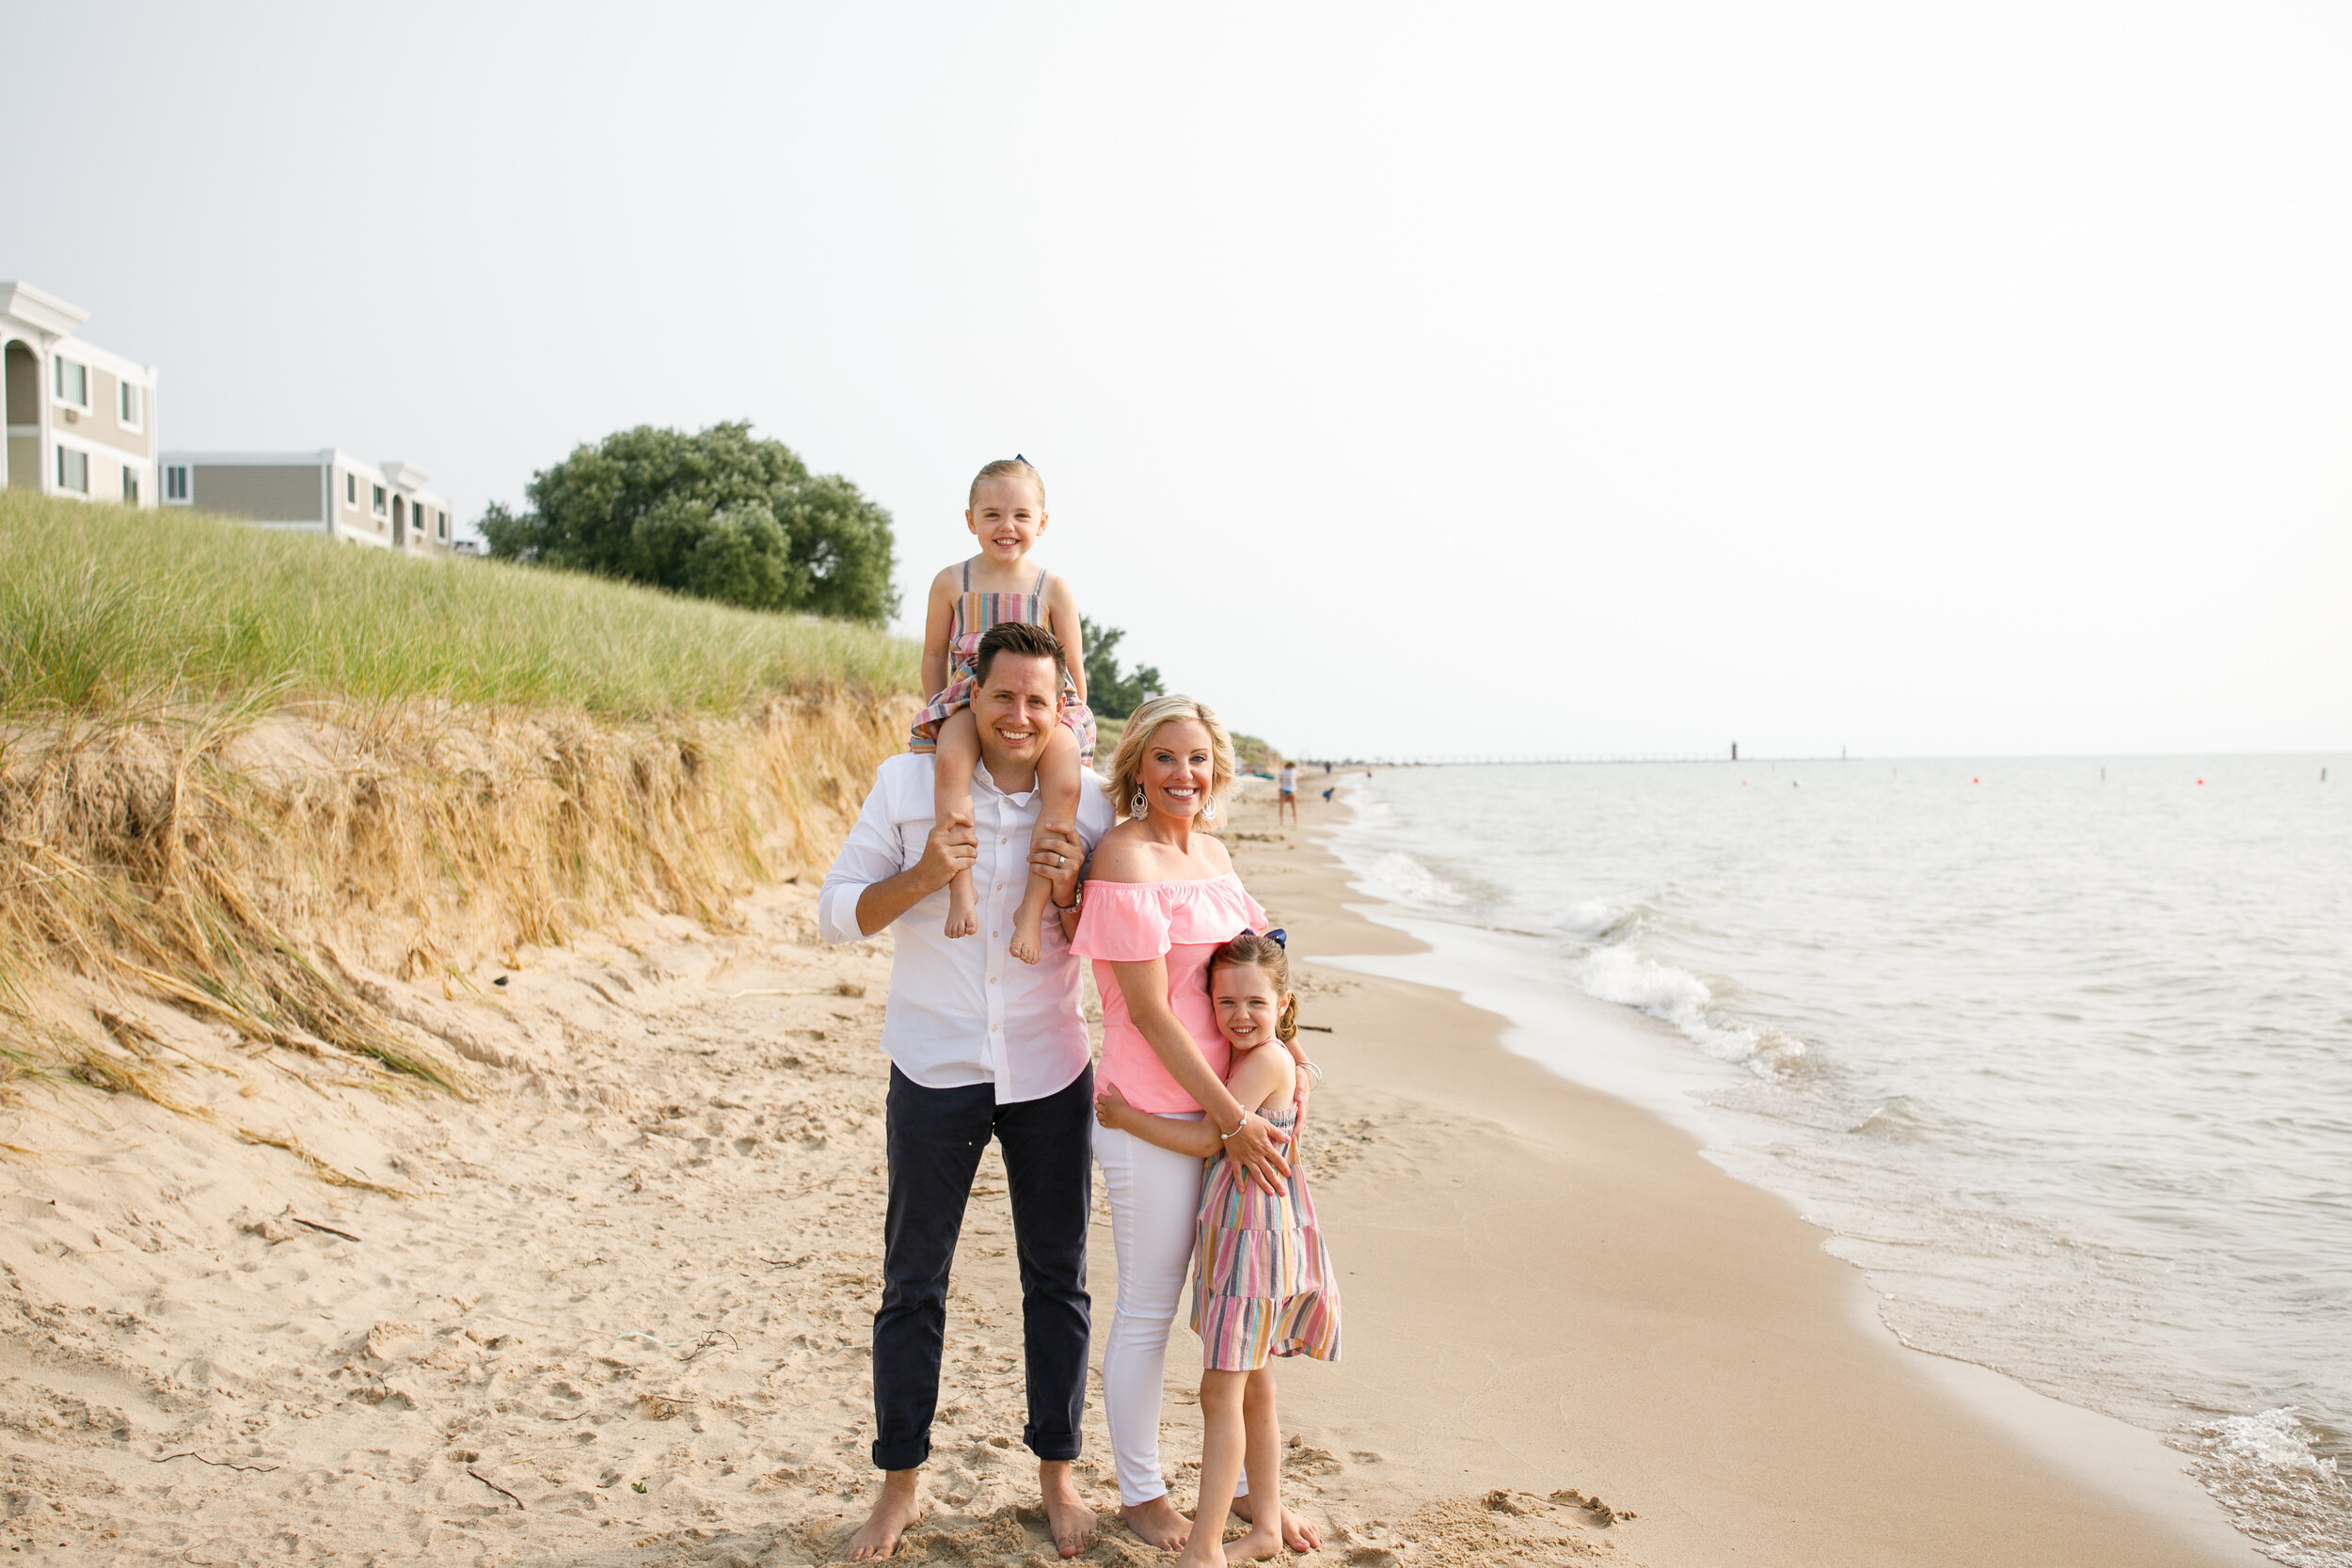 south haven family session - south haven family photographer - j darling photo001.jpg